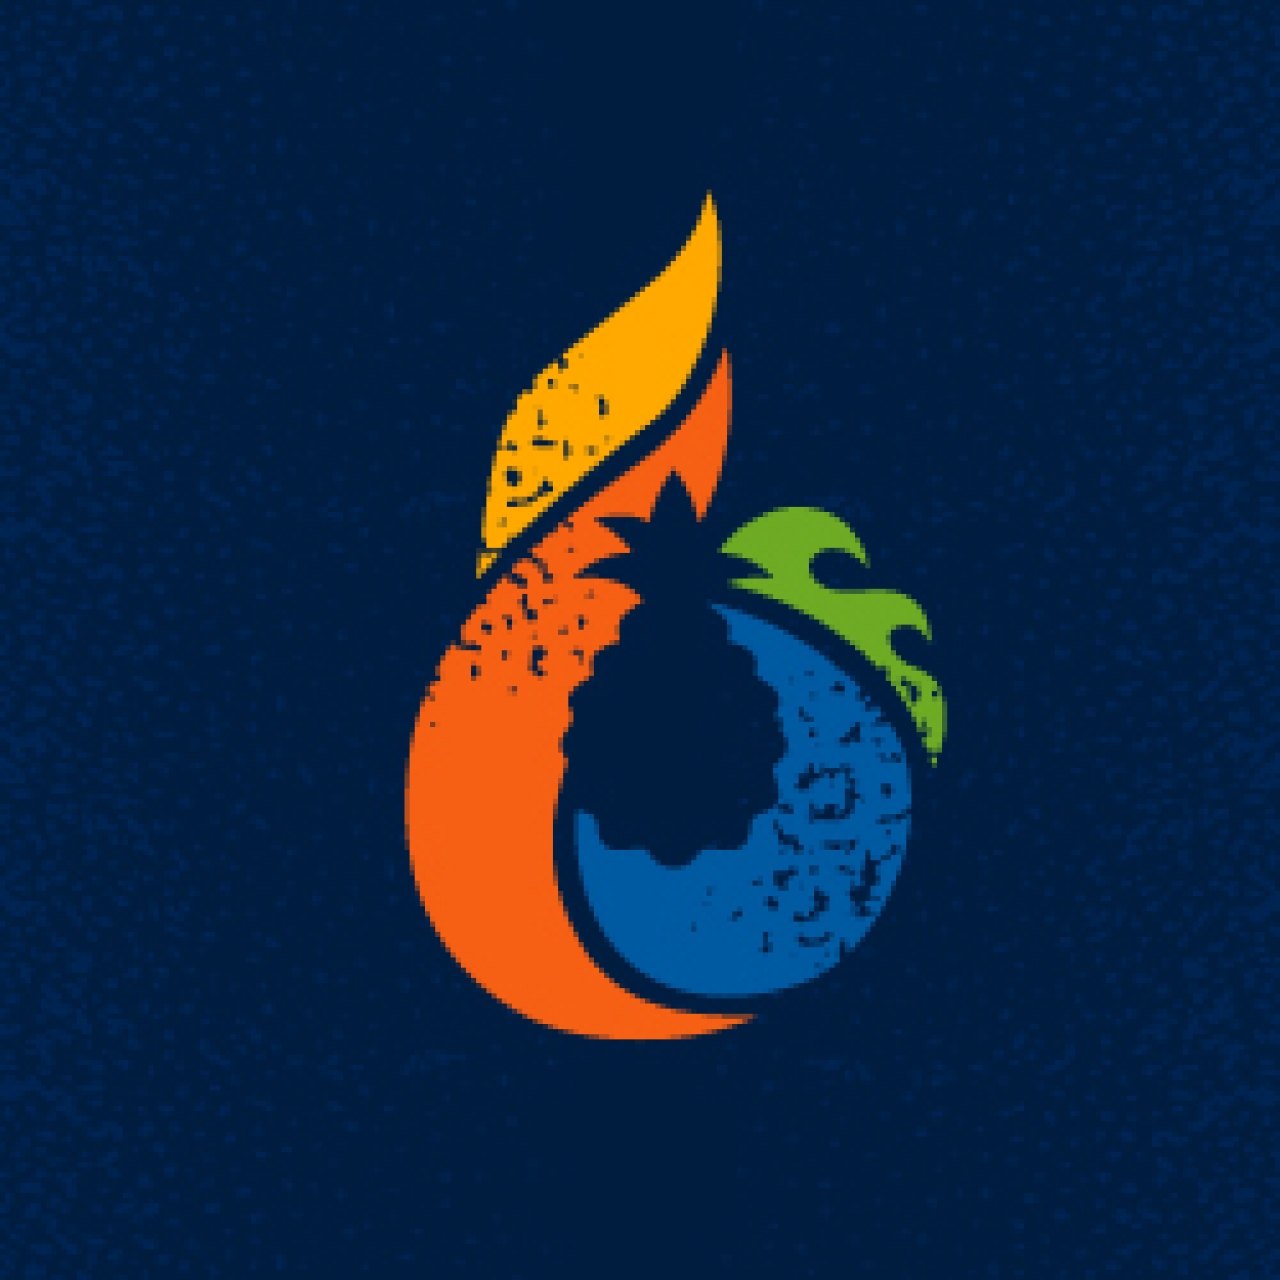 Islanders Hawaiian Barbecue Logo Design with bright colors and symbolic shapes of ocean, beach and sun with a pineapple defined in the negative space to represent hospitality.